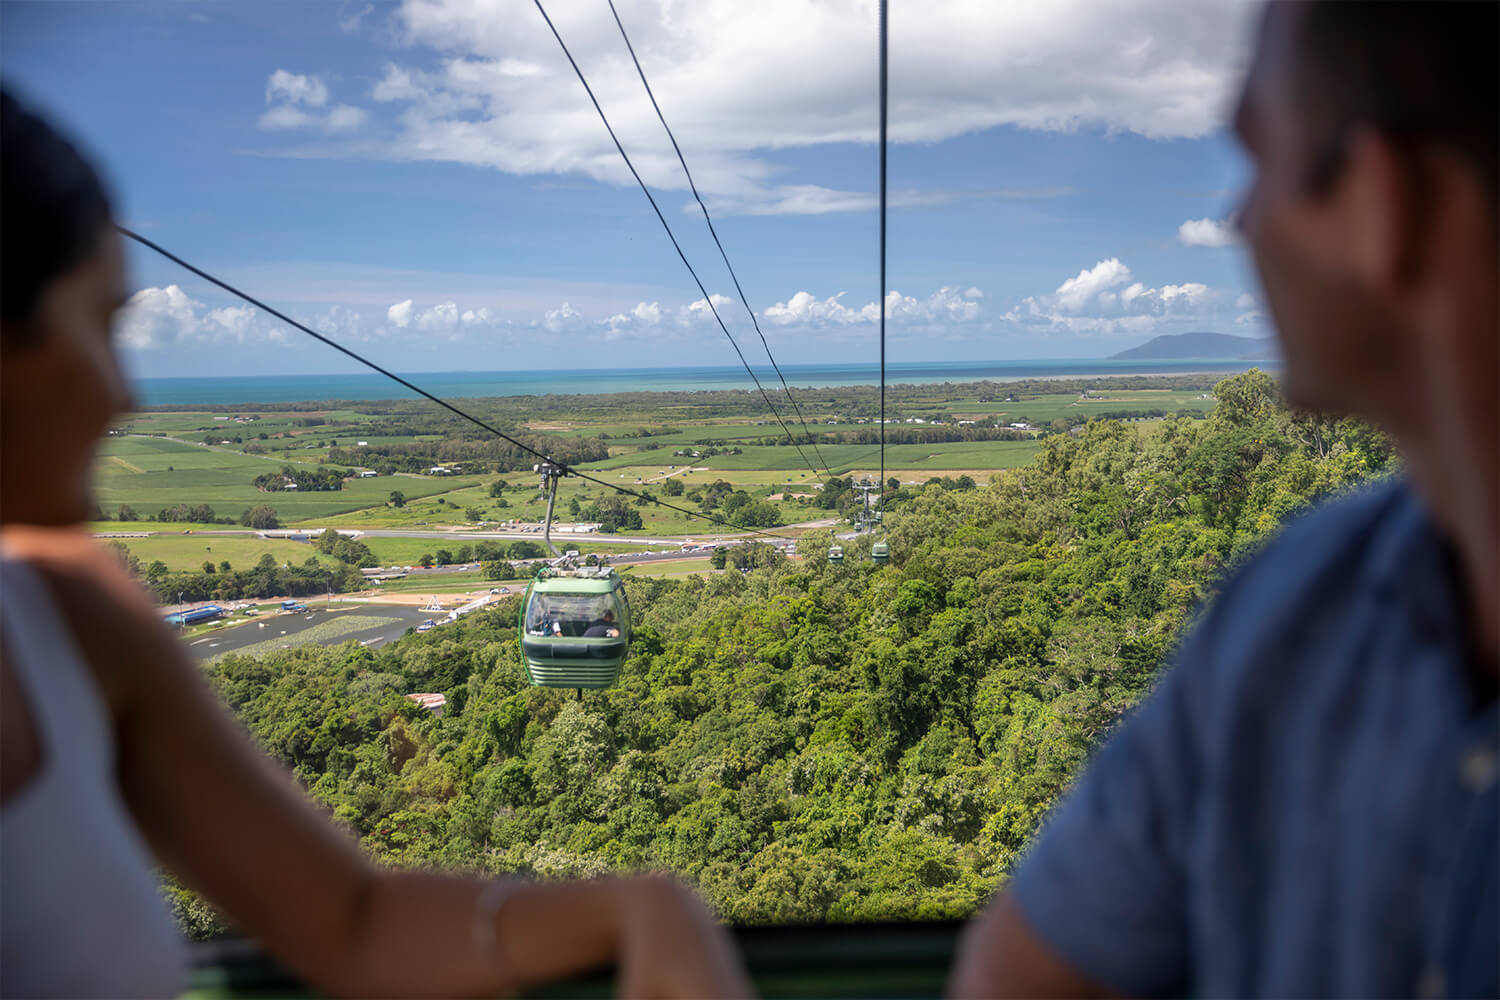 skyrail rainforest cableway with views of cairns